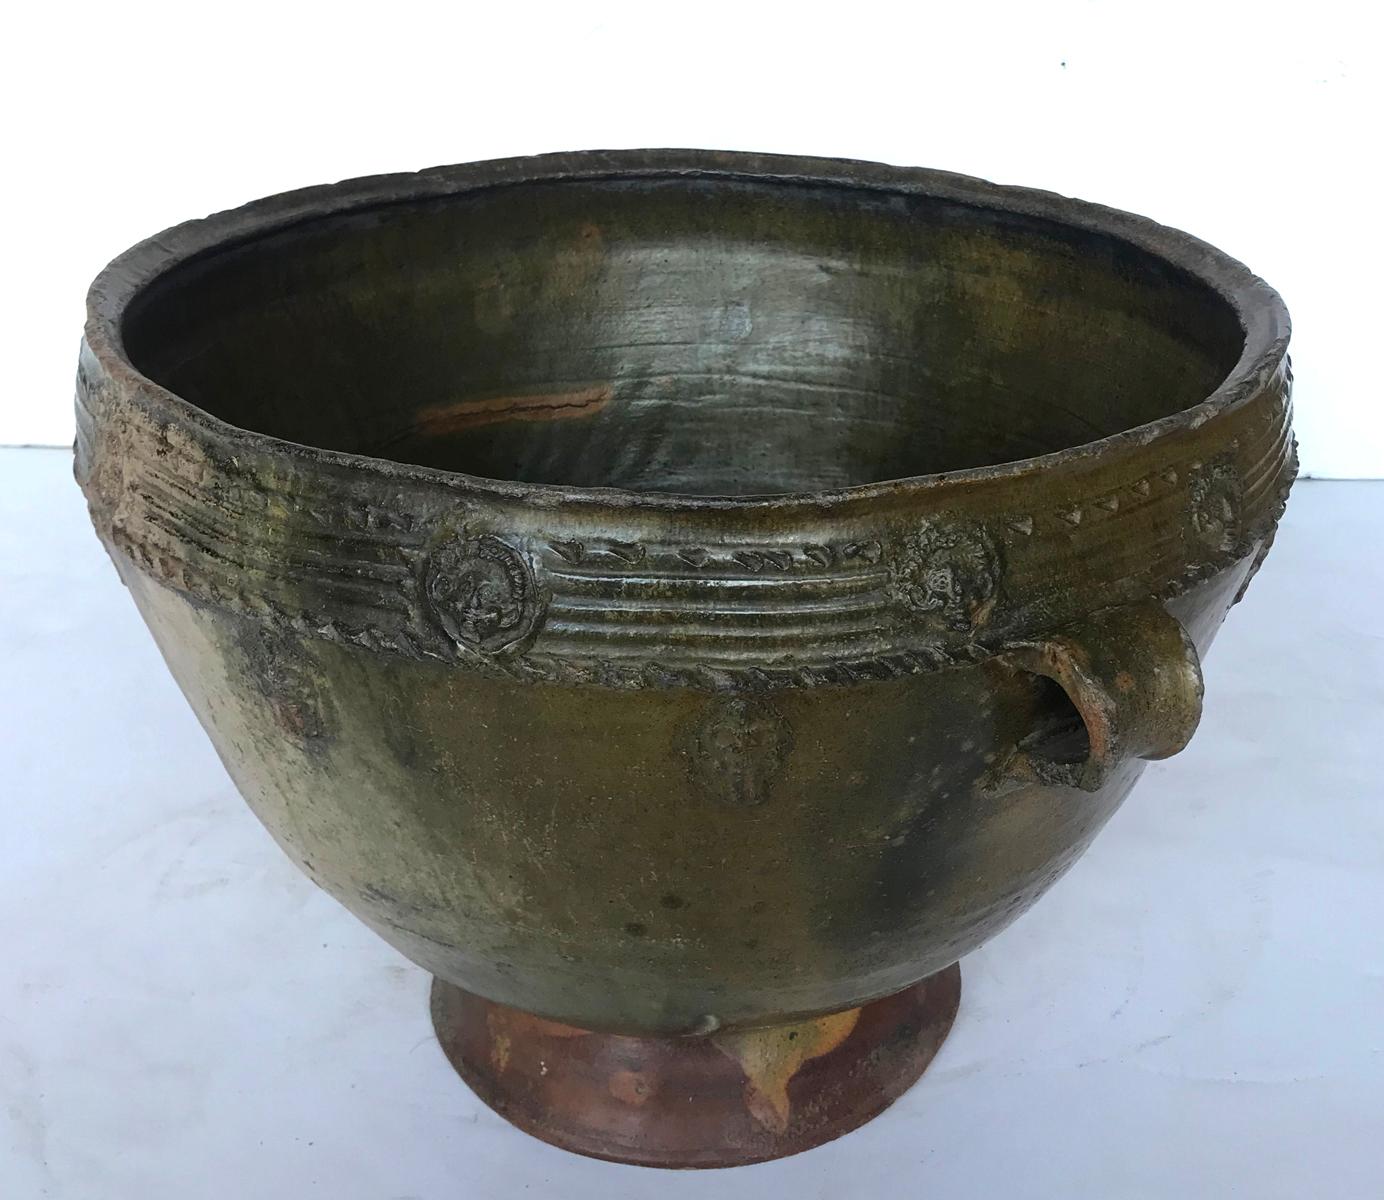 Early 20th century water pot, a Trubal,  from the highlands of Central America.   Delicate applied pottery decorations of women and faces surround the outer edge. Handmade, wood fired, resulting in a lovely greenish, earthy glaze.
Sturdy and